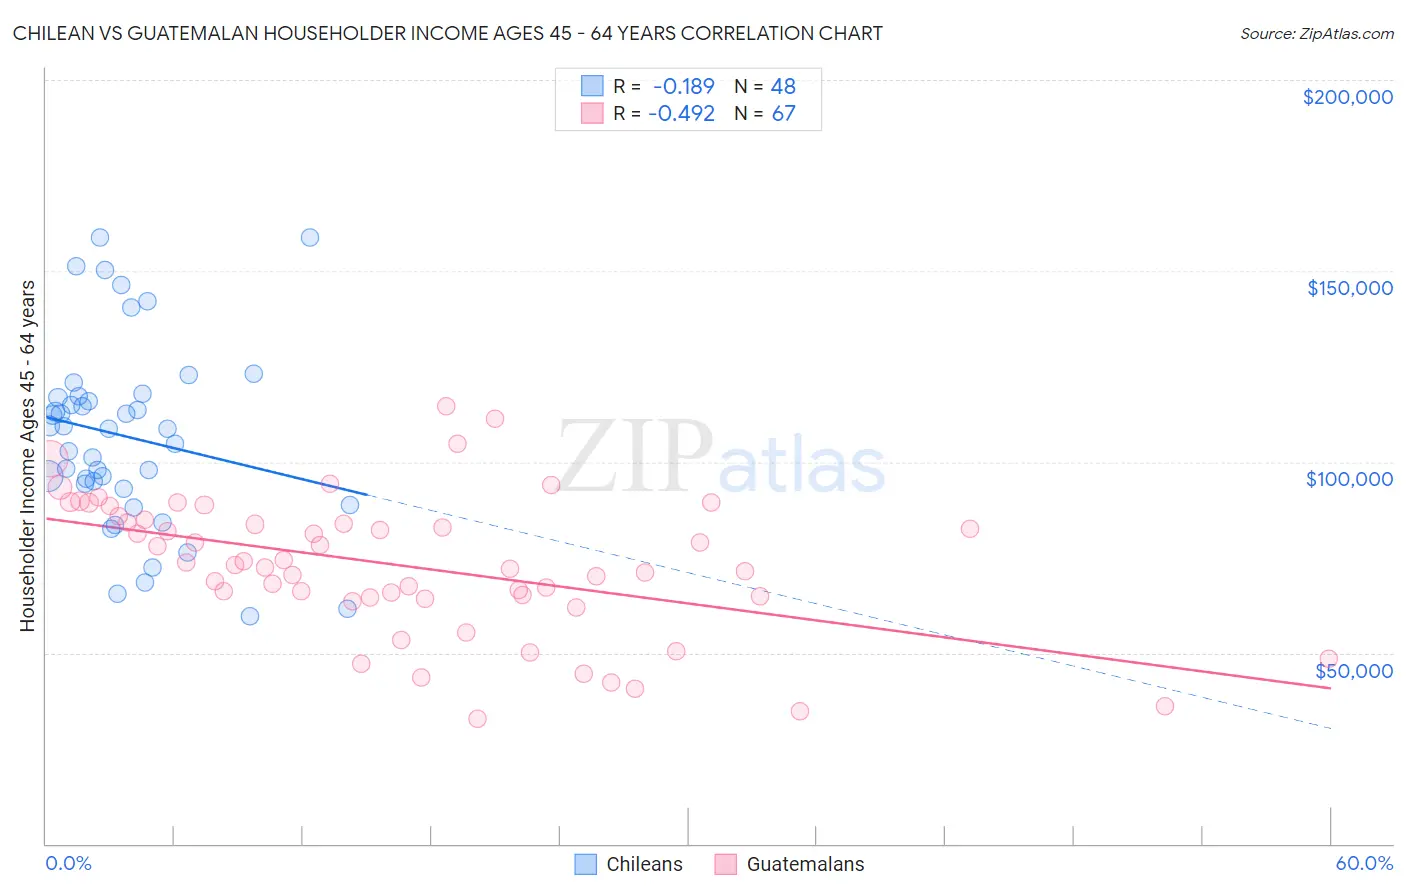 Chilean vs Guatemalan Householder Income Ages 45 - 64 years